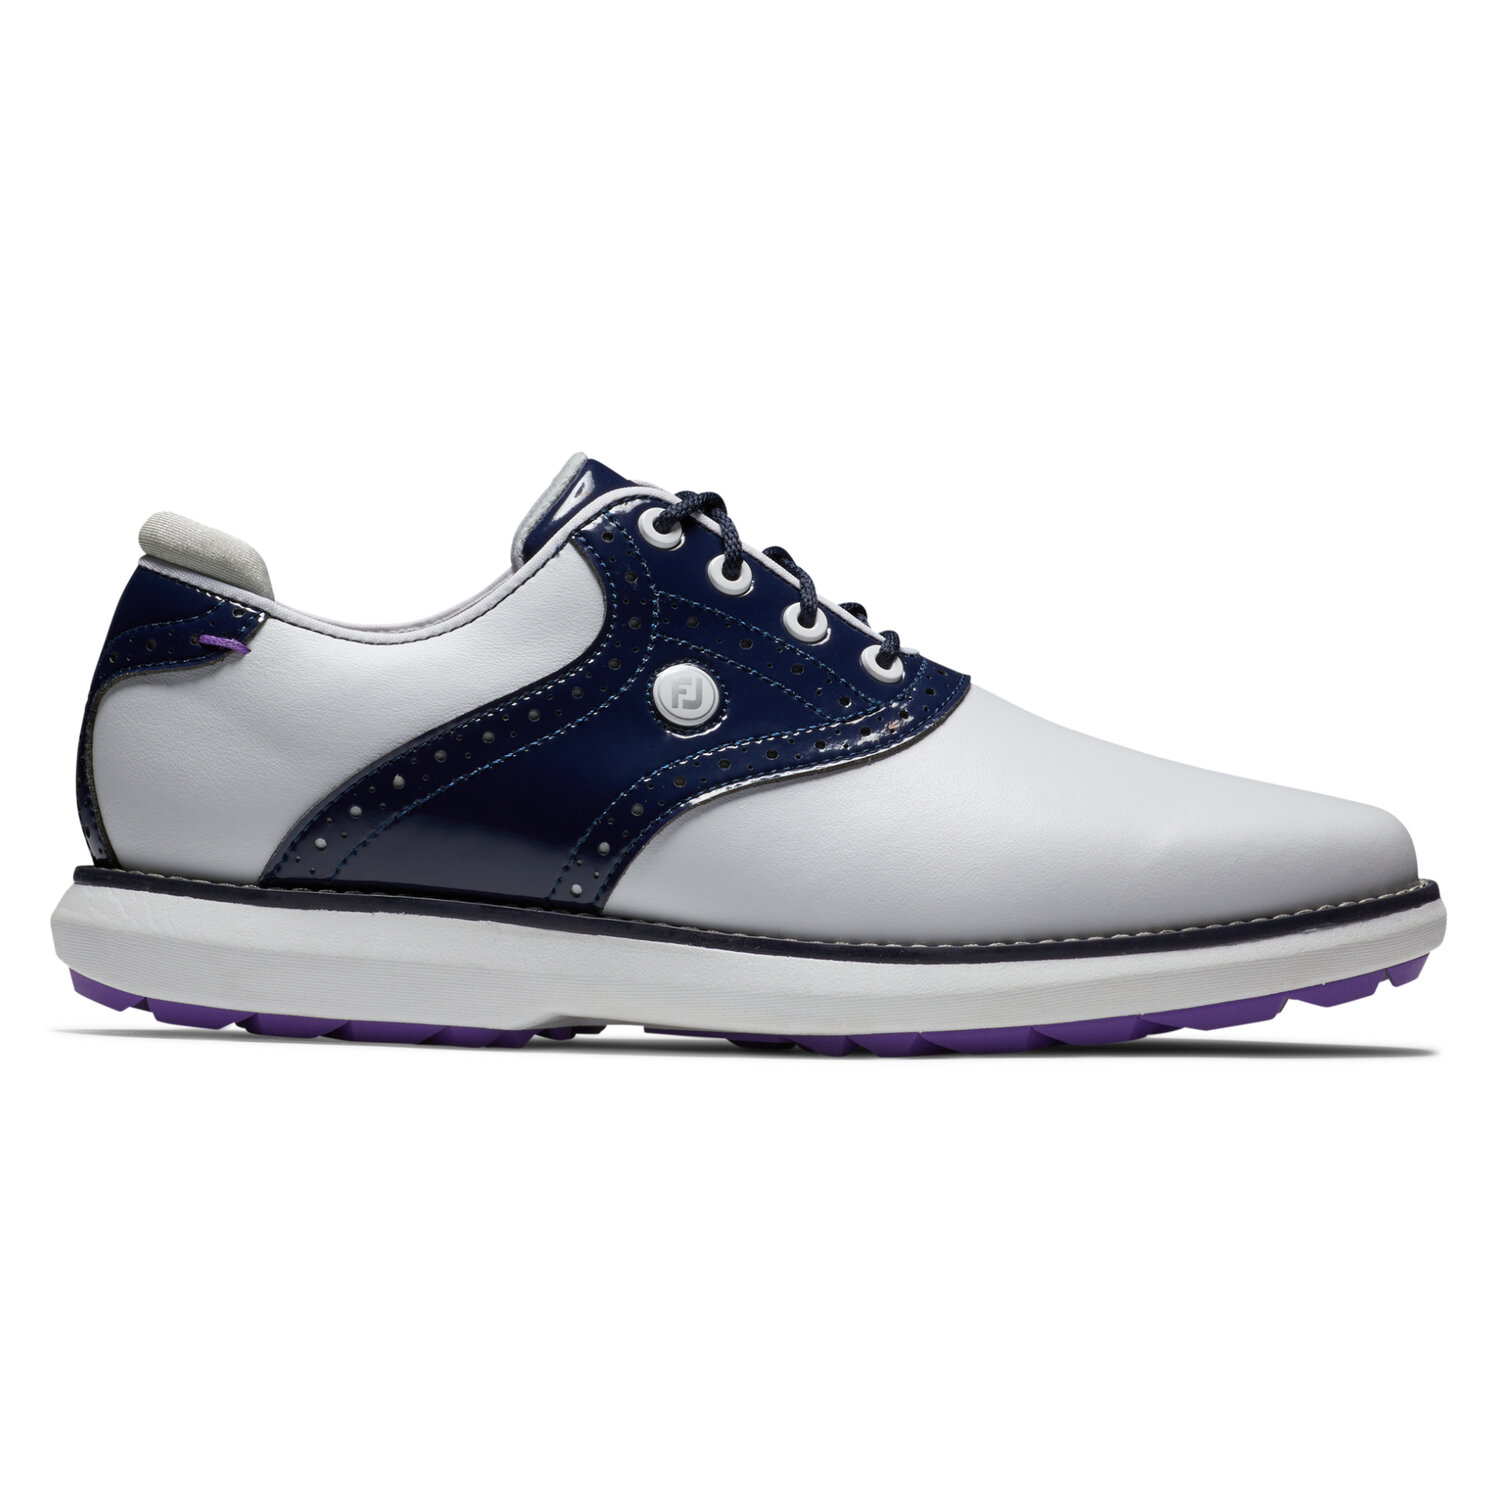 Footjoy Traditions Spikeless